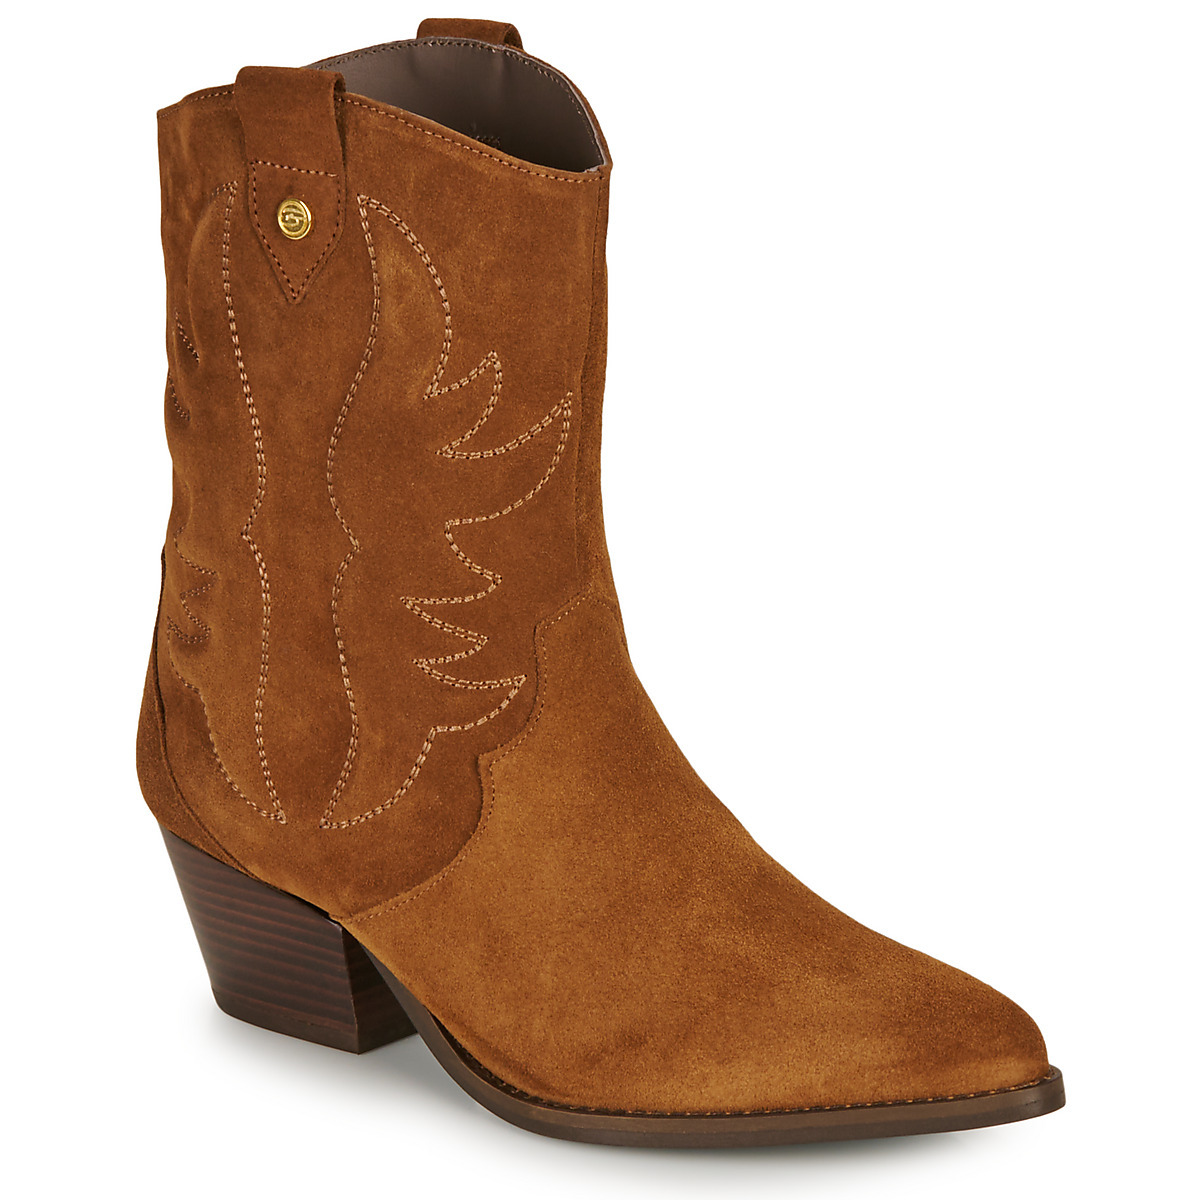 Lady Brown Boots - Betty London - Spartoo GOOFASH